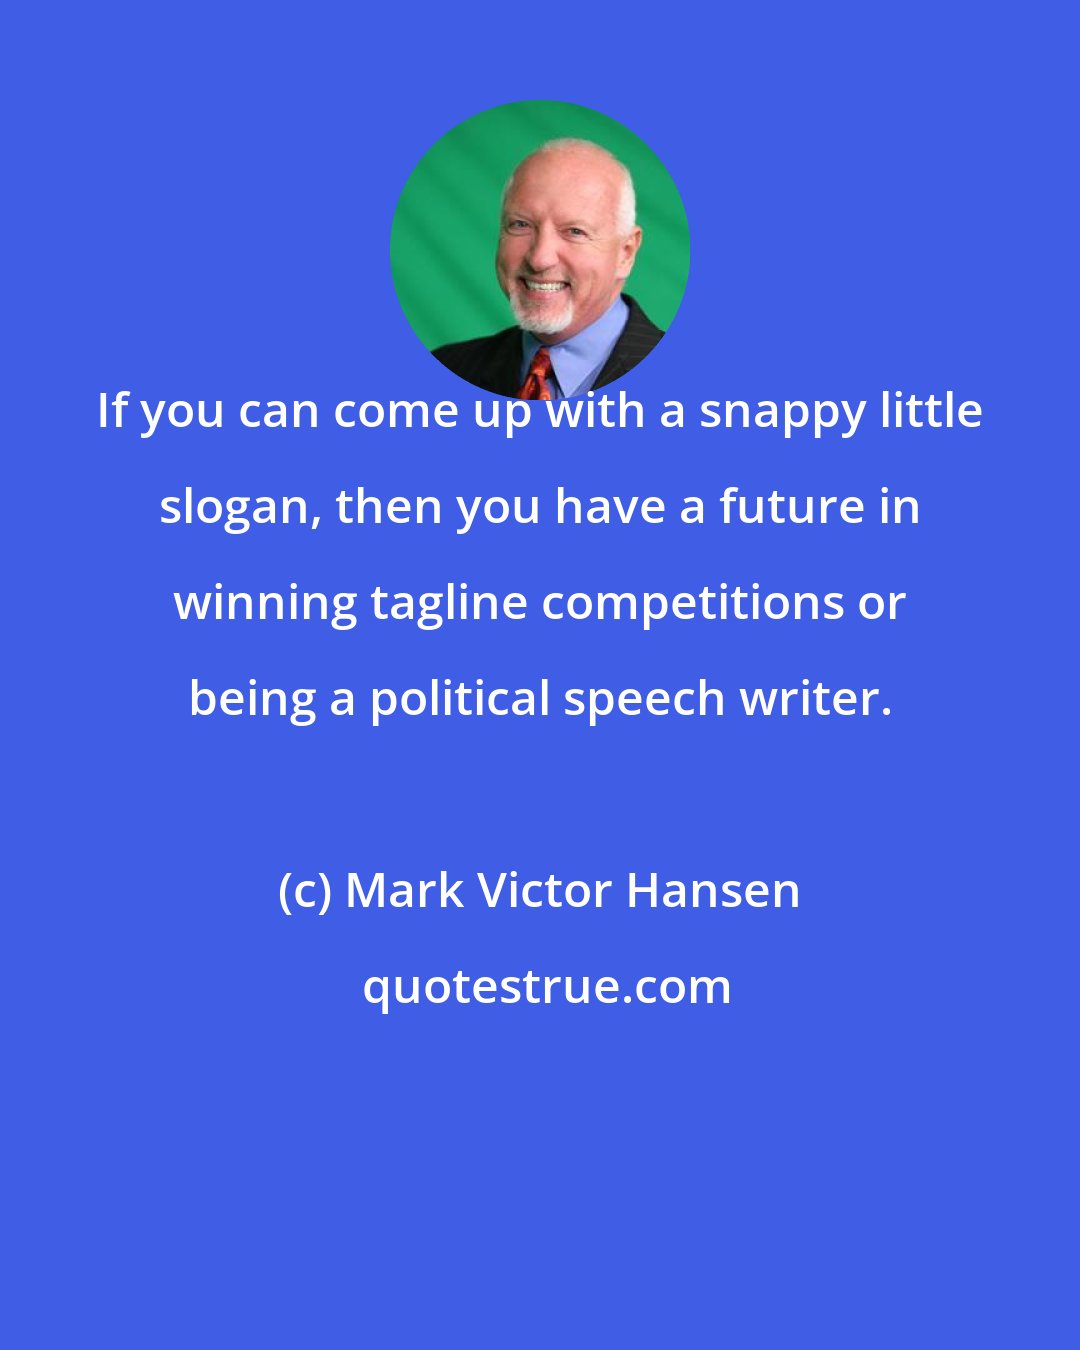 Mark Victor Hansen: If you can come up with a snappy little slogan, then you have a future in winning tagline competitions or being a political speech writer.